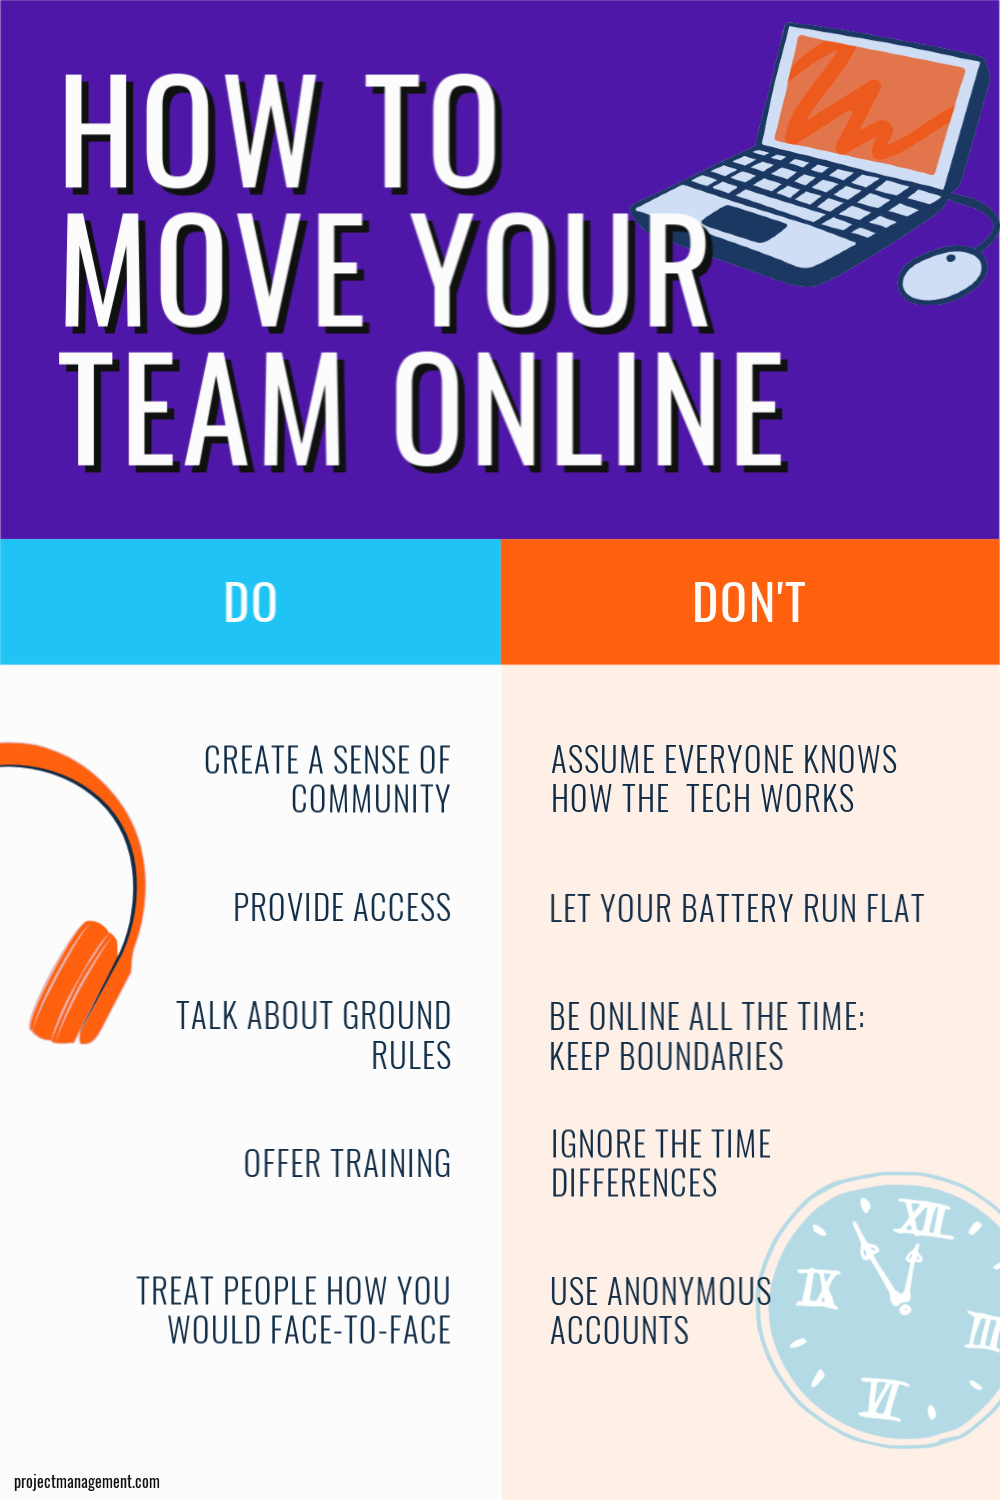 how to move your team online infographic